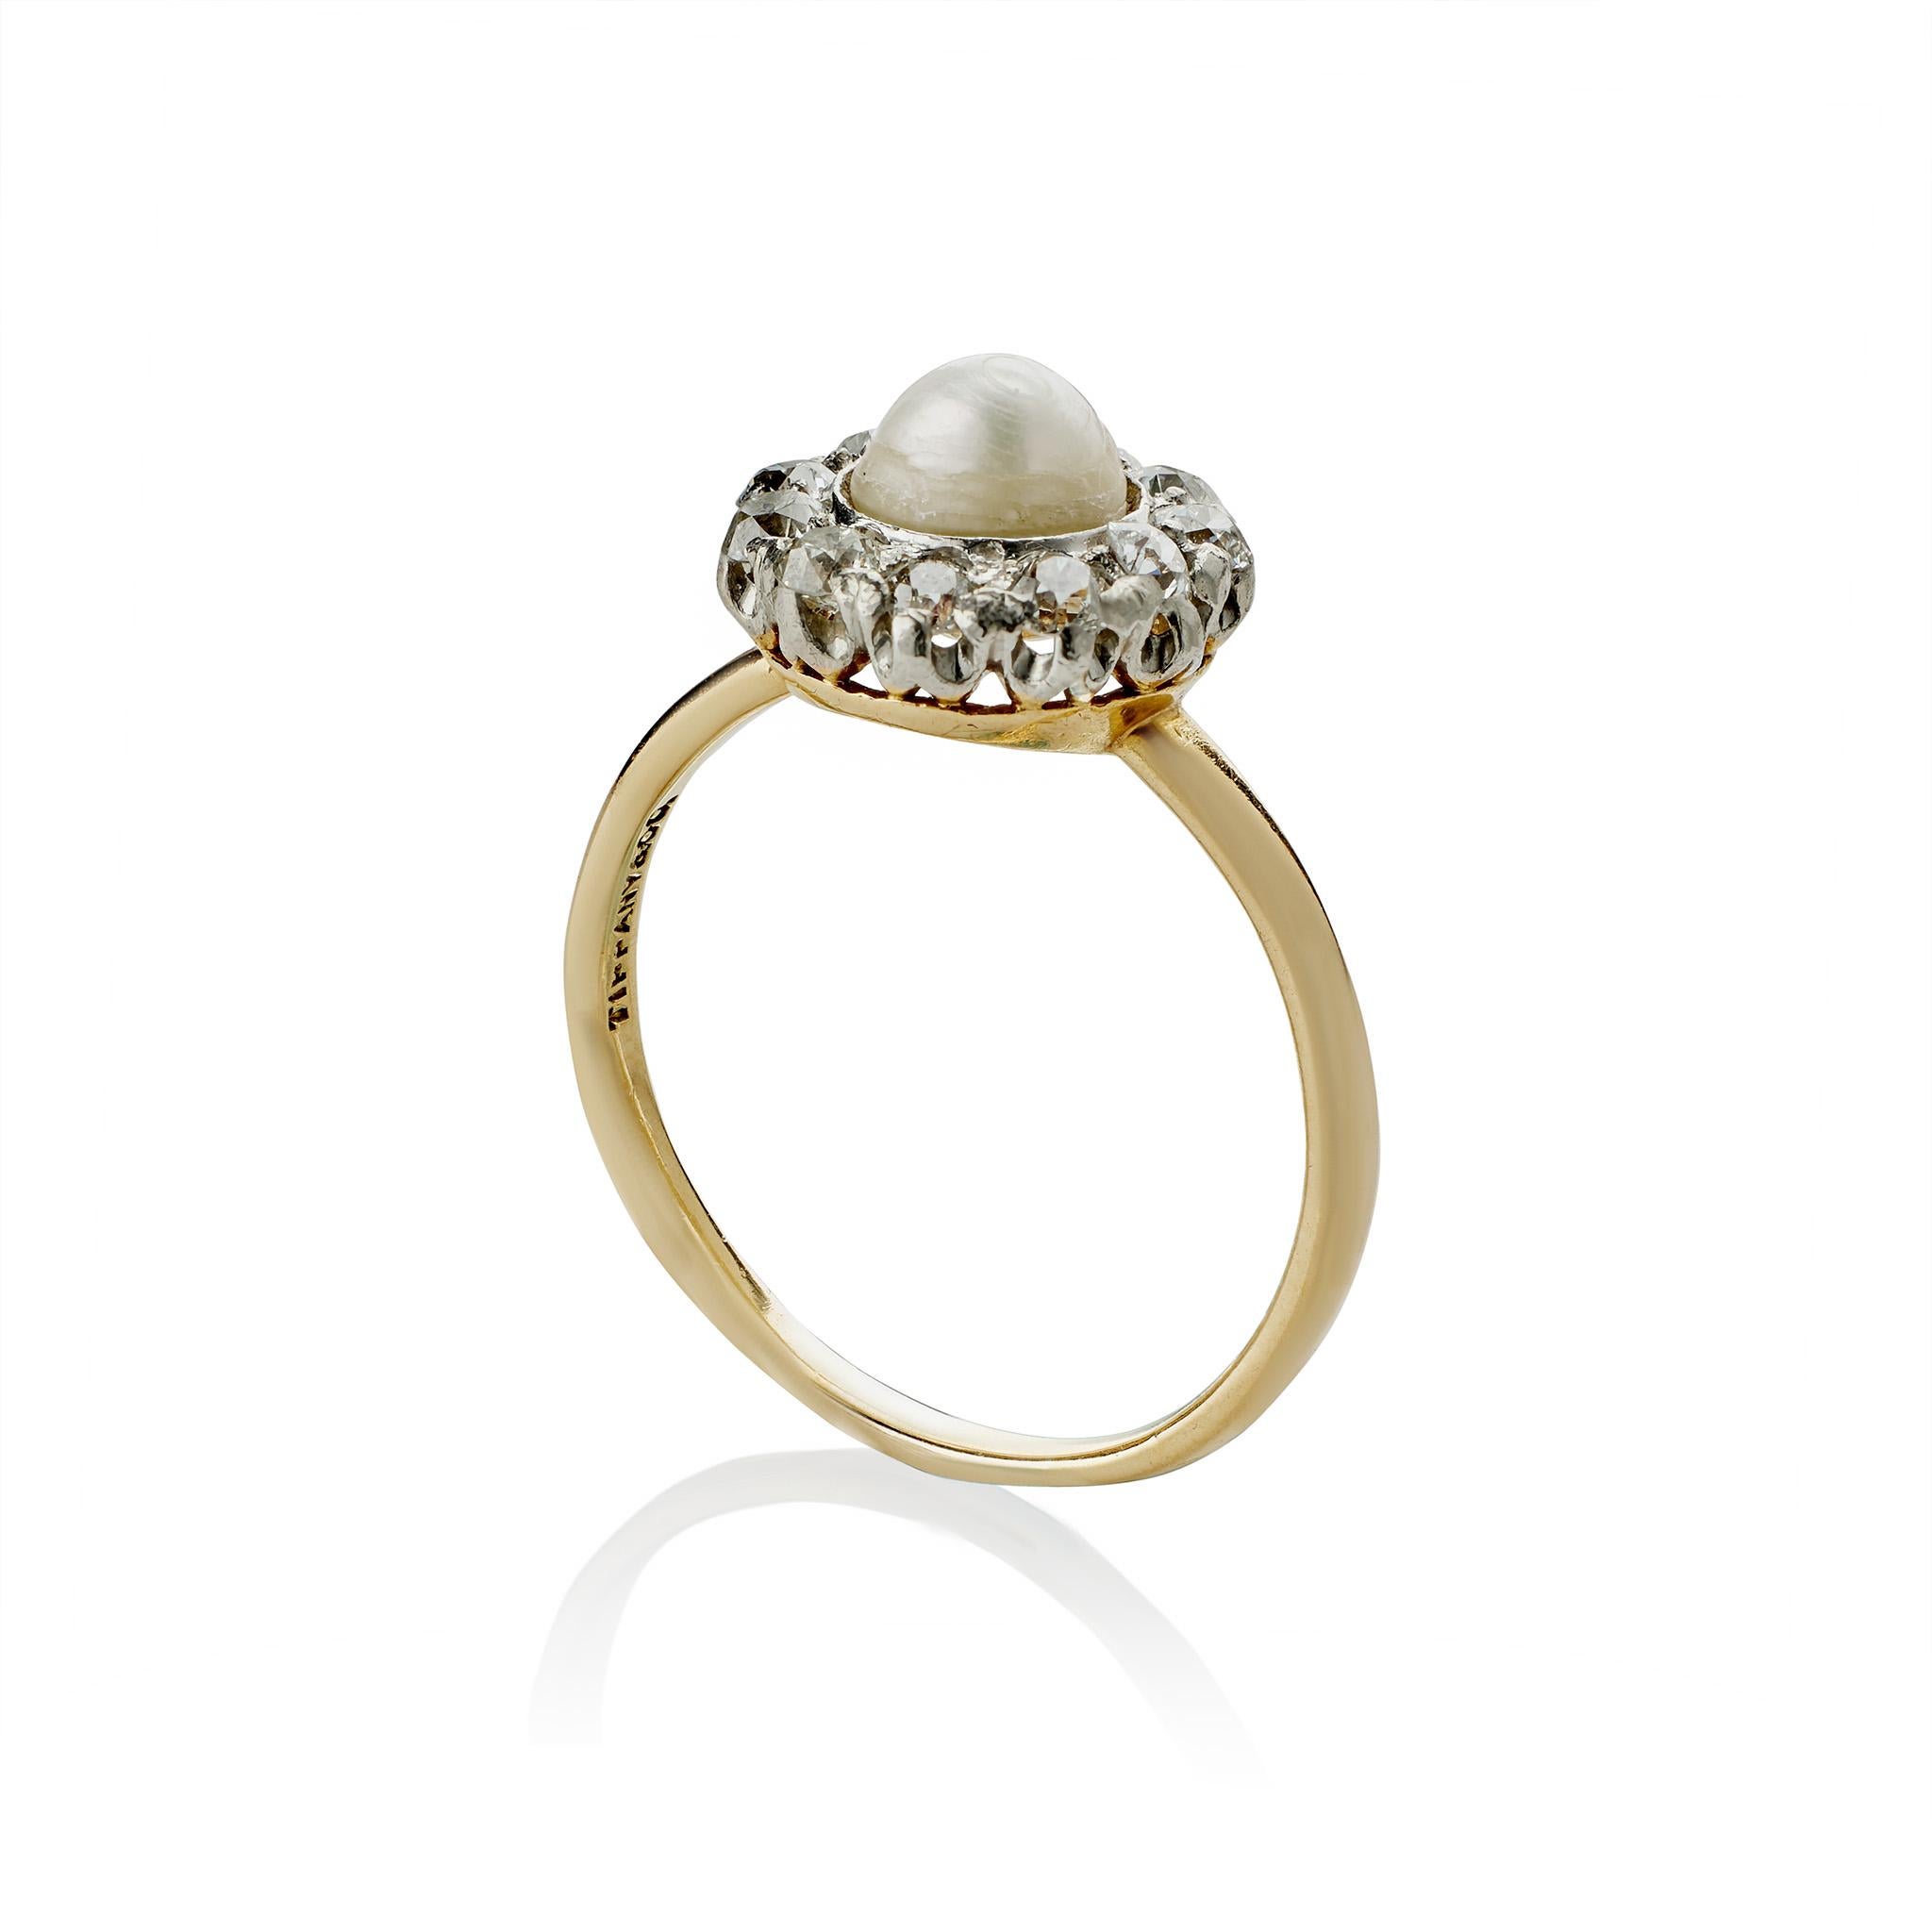 Dating to circa 1900, this Tiffany & Co. ring is set with a freshwater pearl and diamonds. The ring centers a high domed button pearl with ivory tones, framed by eleven old European-cut diamonds, mounted in platinum-topped 18K gold. This refined and